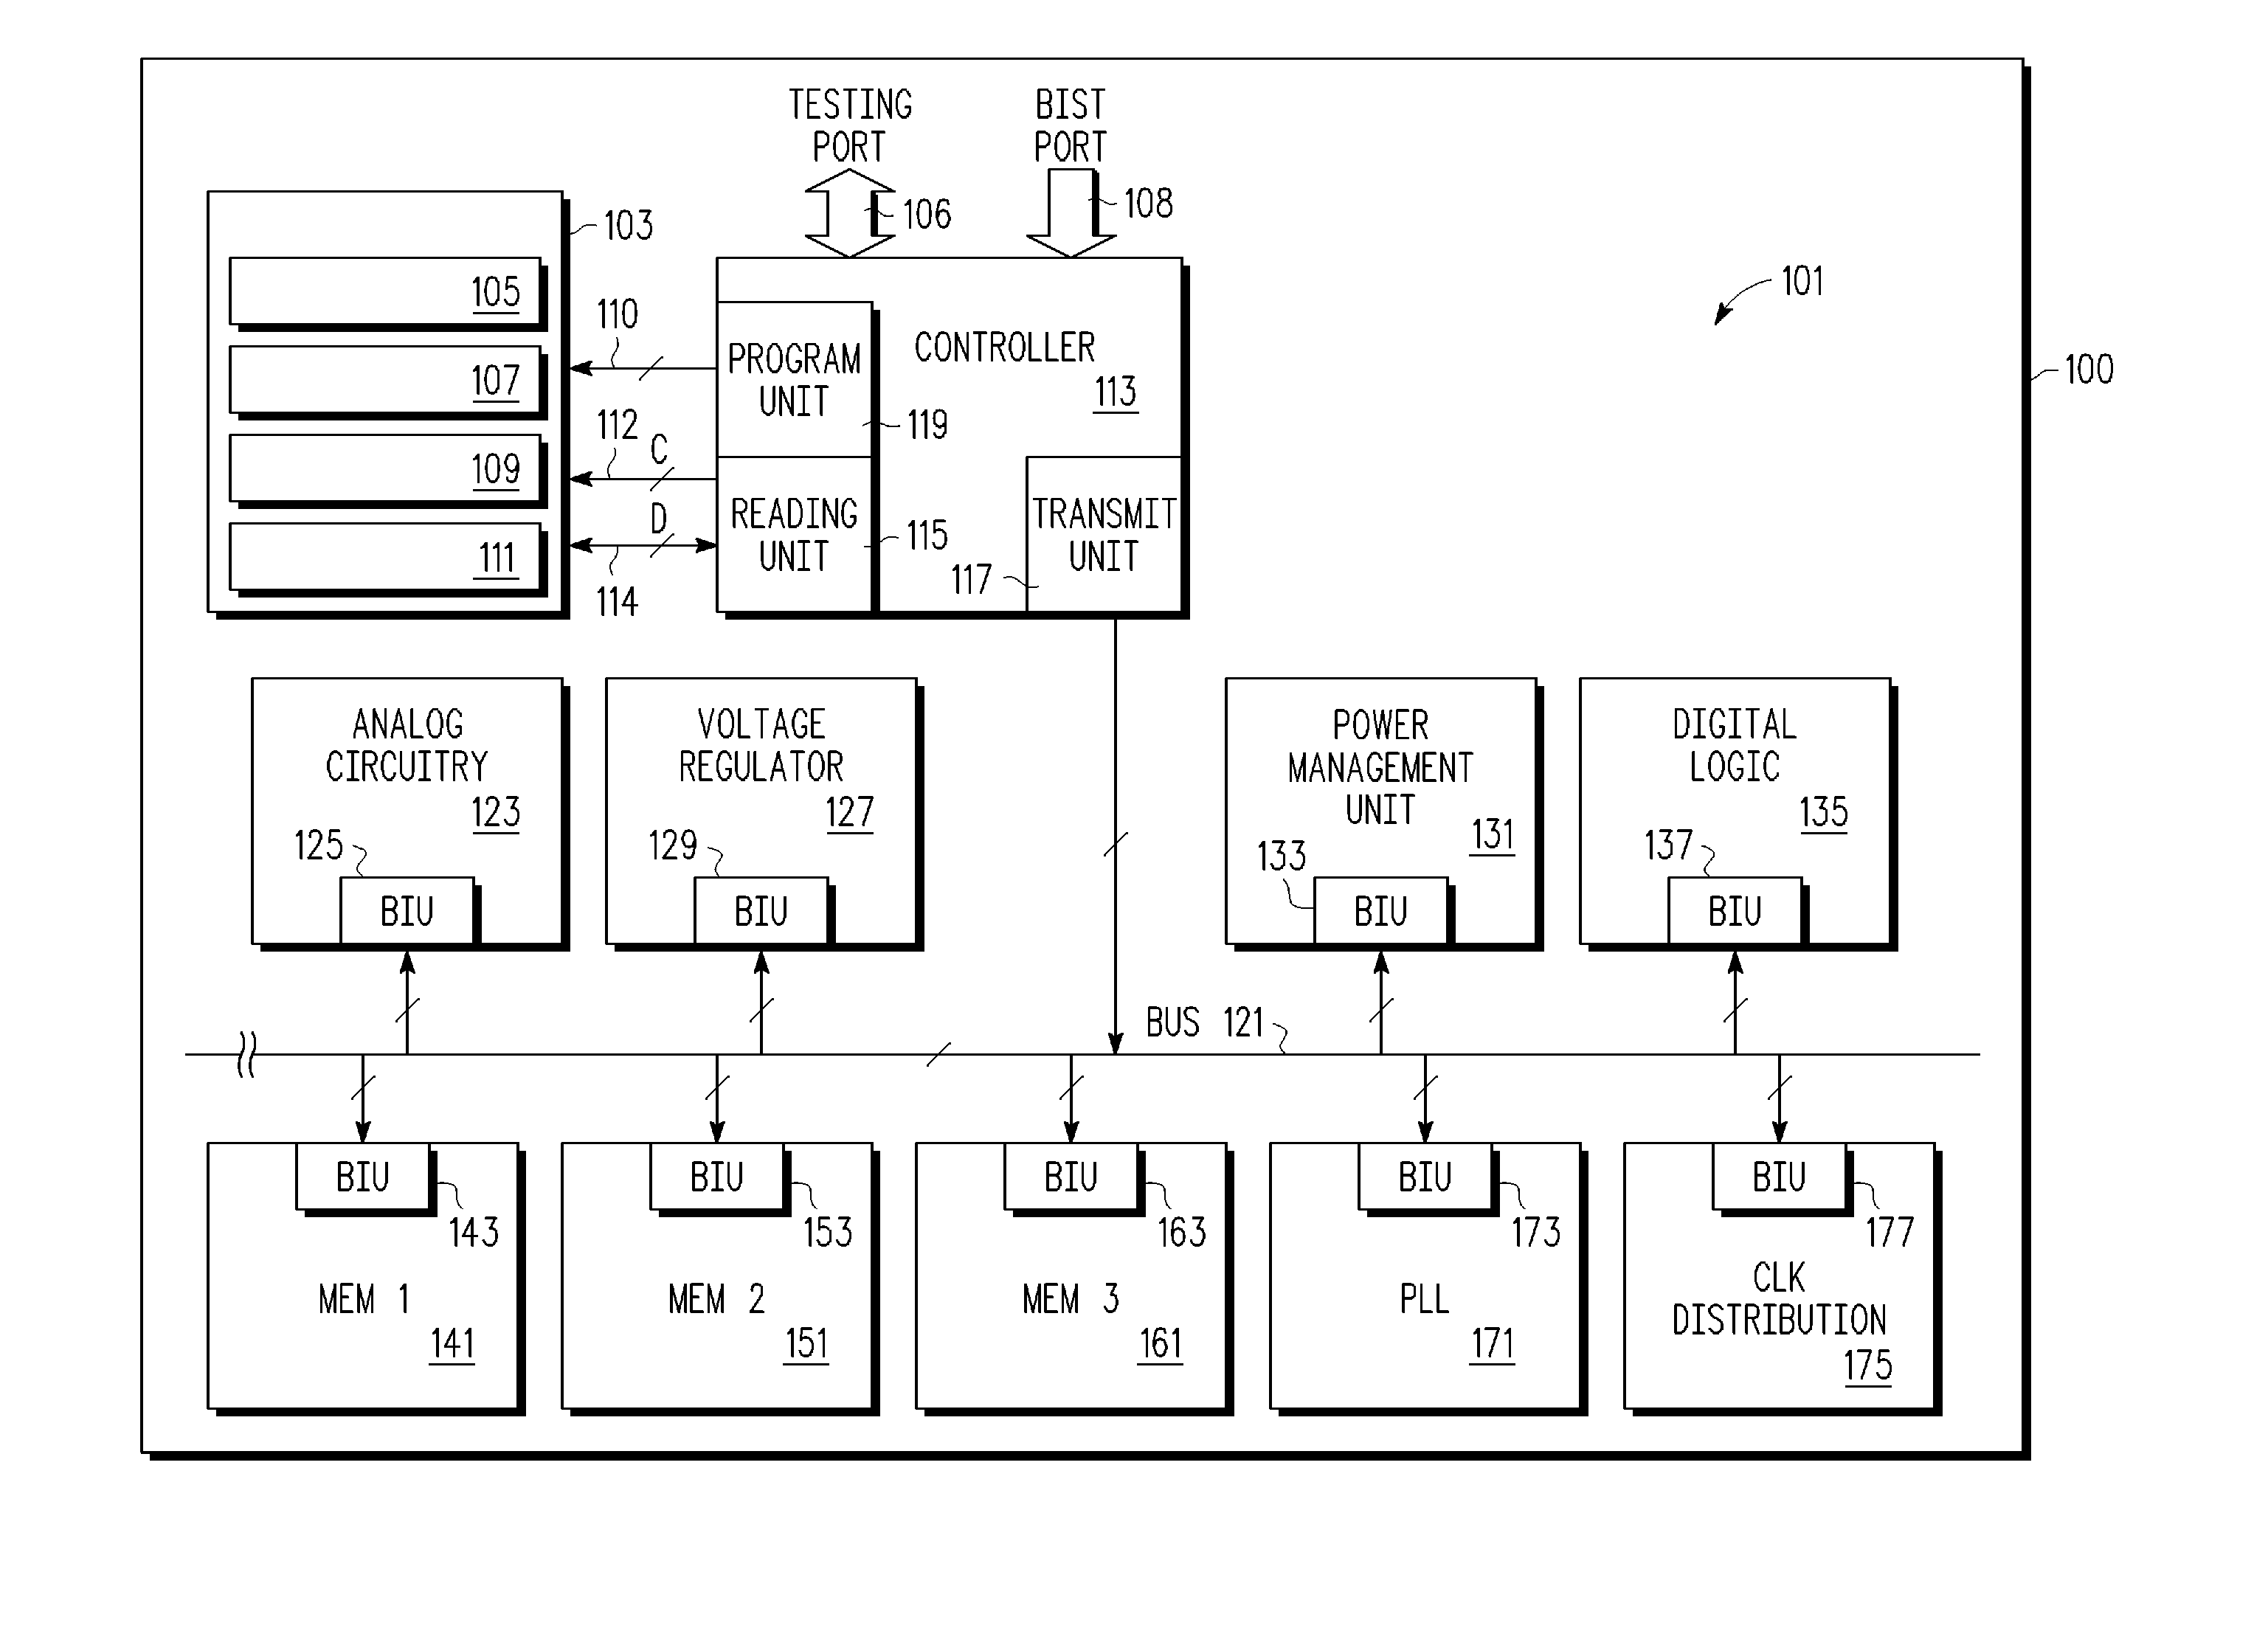 One time programmable element system in an integrated circuit